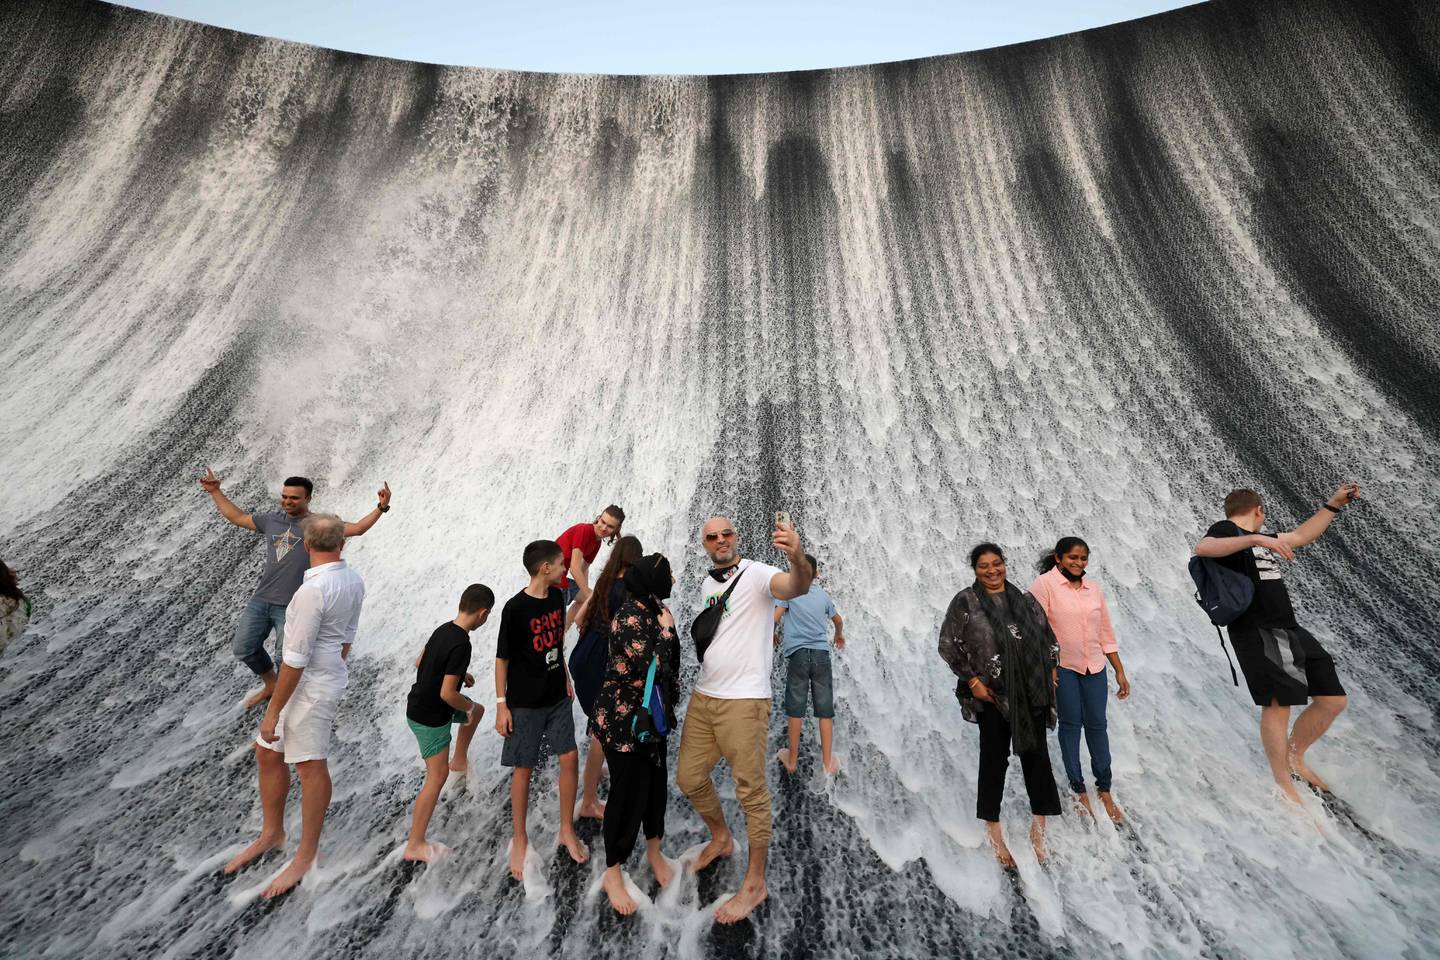 Visitors soak in the Surreal water feature at the World's Fair in Dubai. Photo: AFP